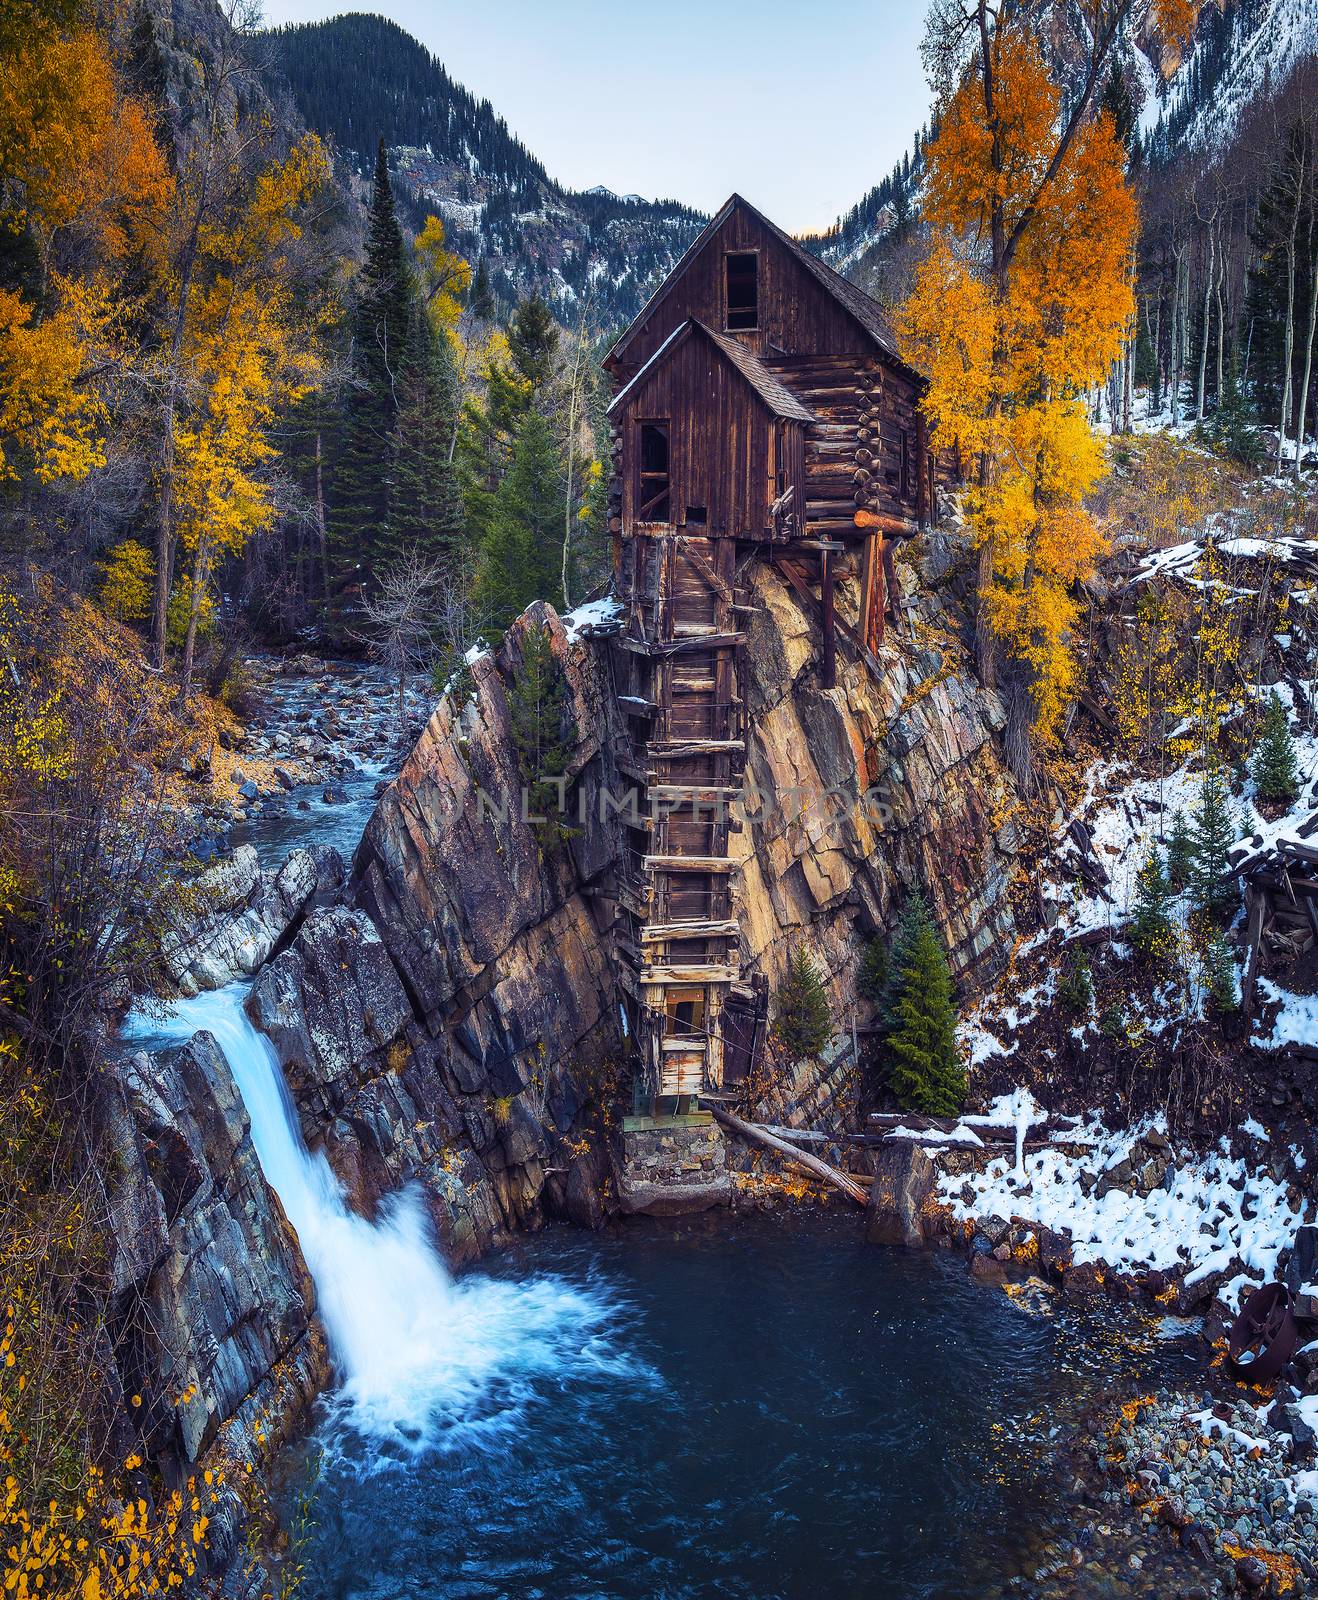 Historic wooden powerhouse called the Crystal Mill in Colorado by nickfox